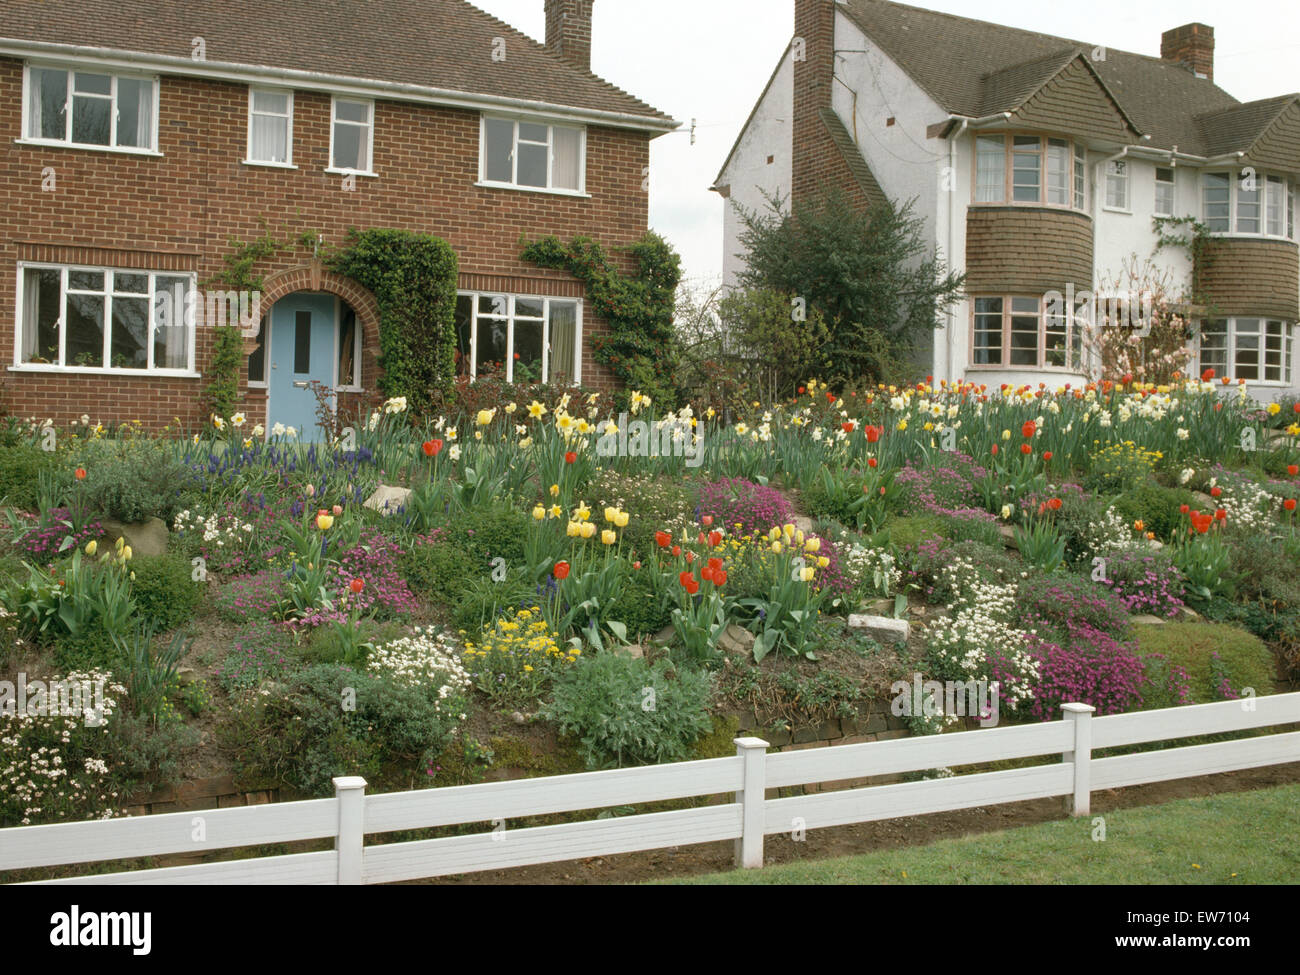 Colorful bulbs and rockery plants growing in front garden of a suburban detached house Stock Photo